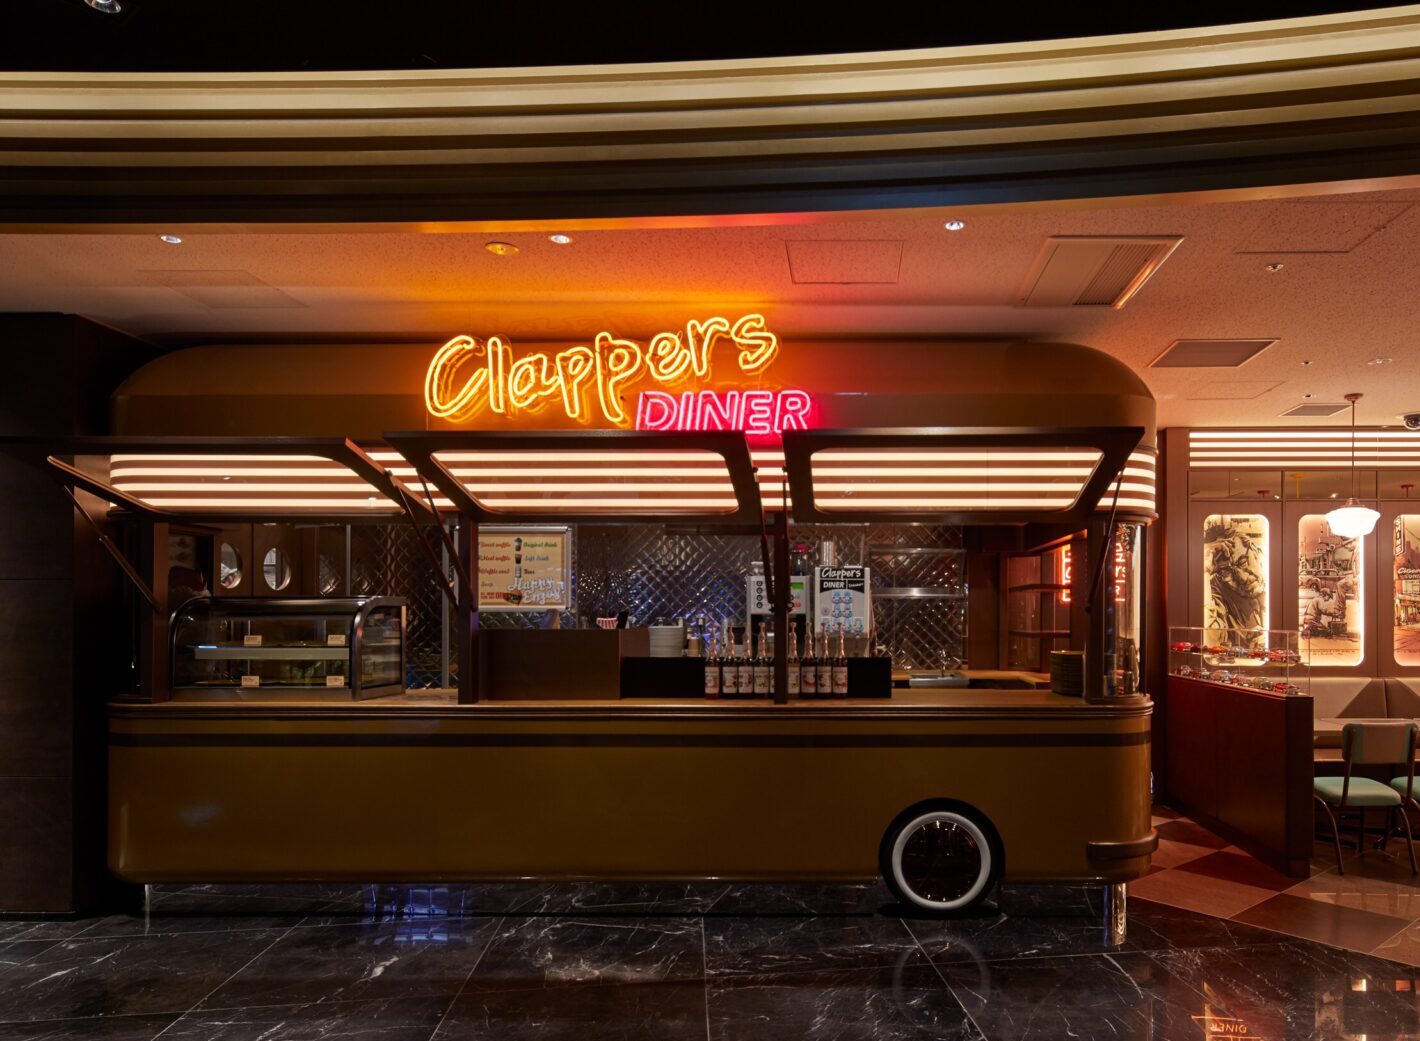 Clappers DINER